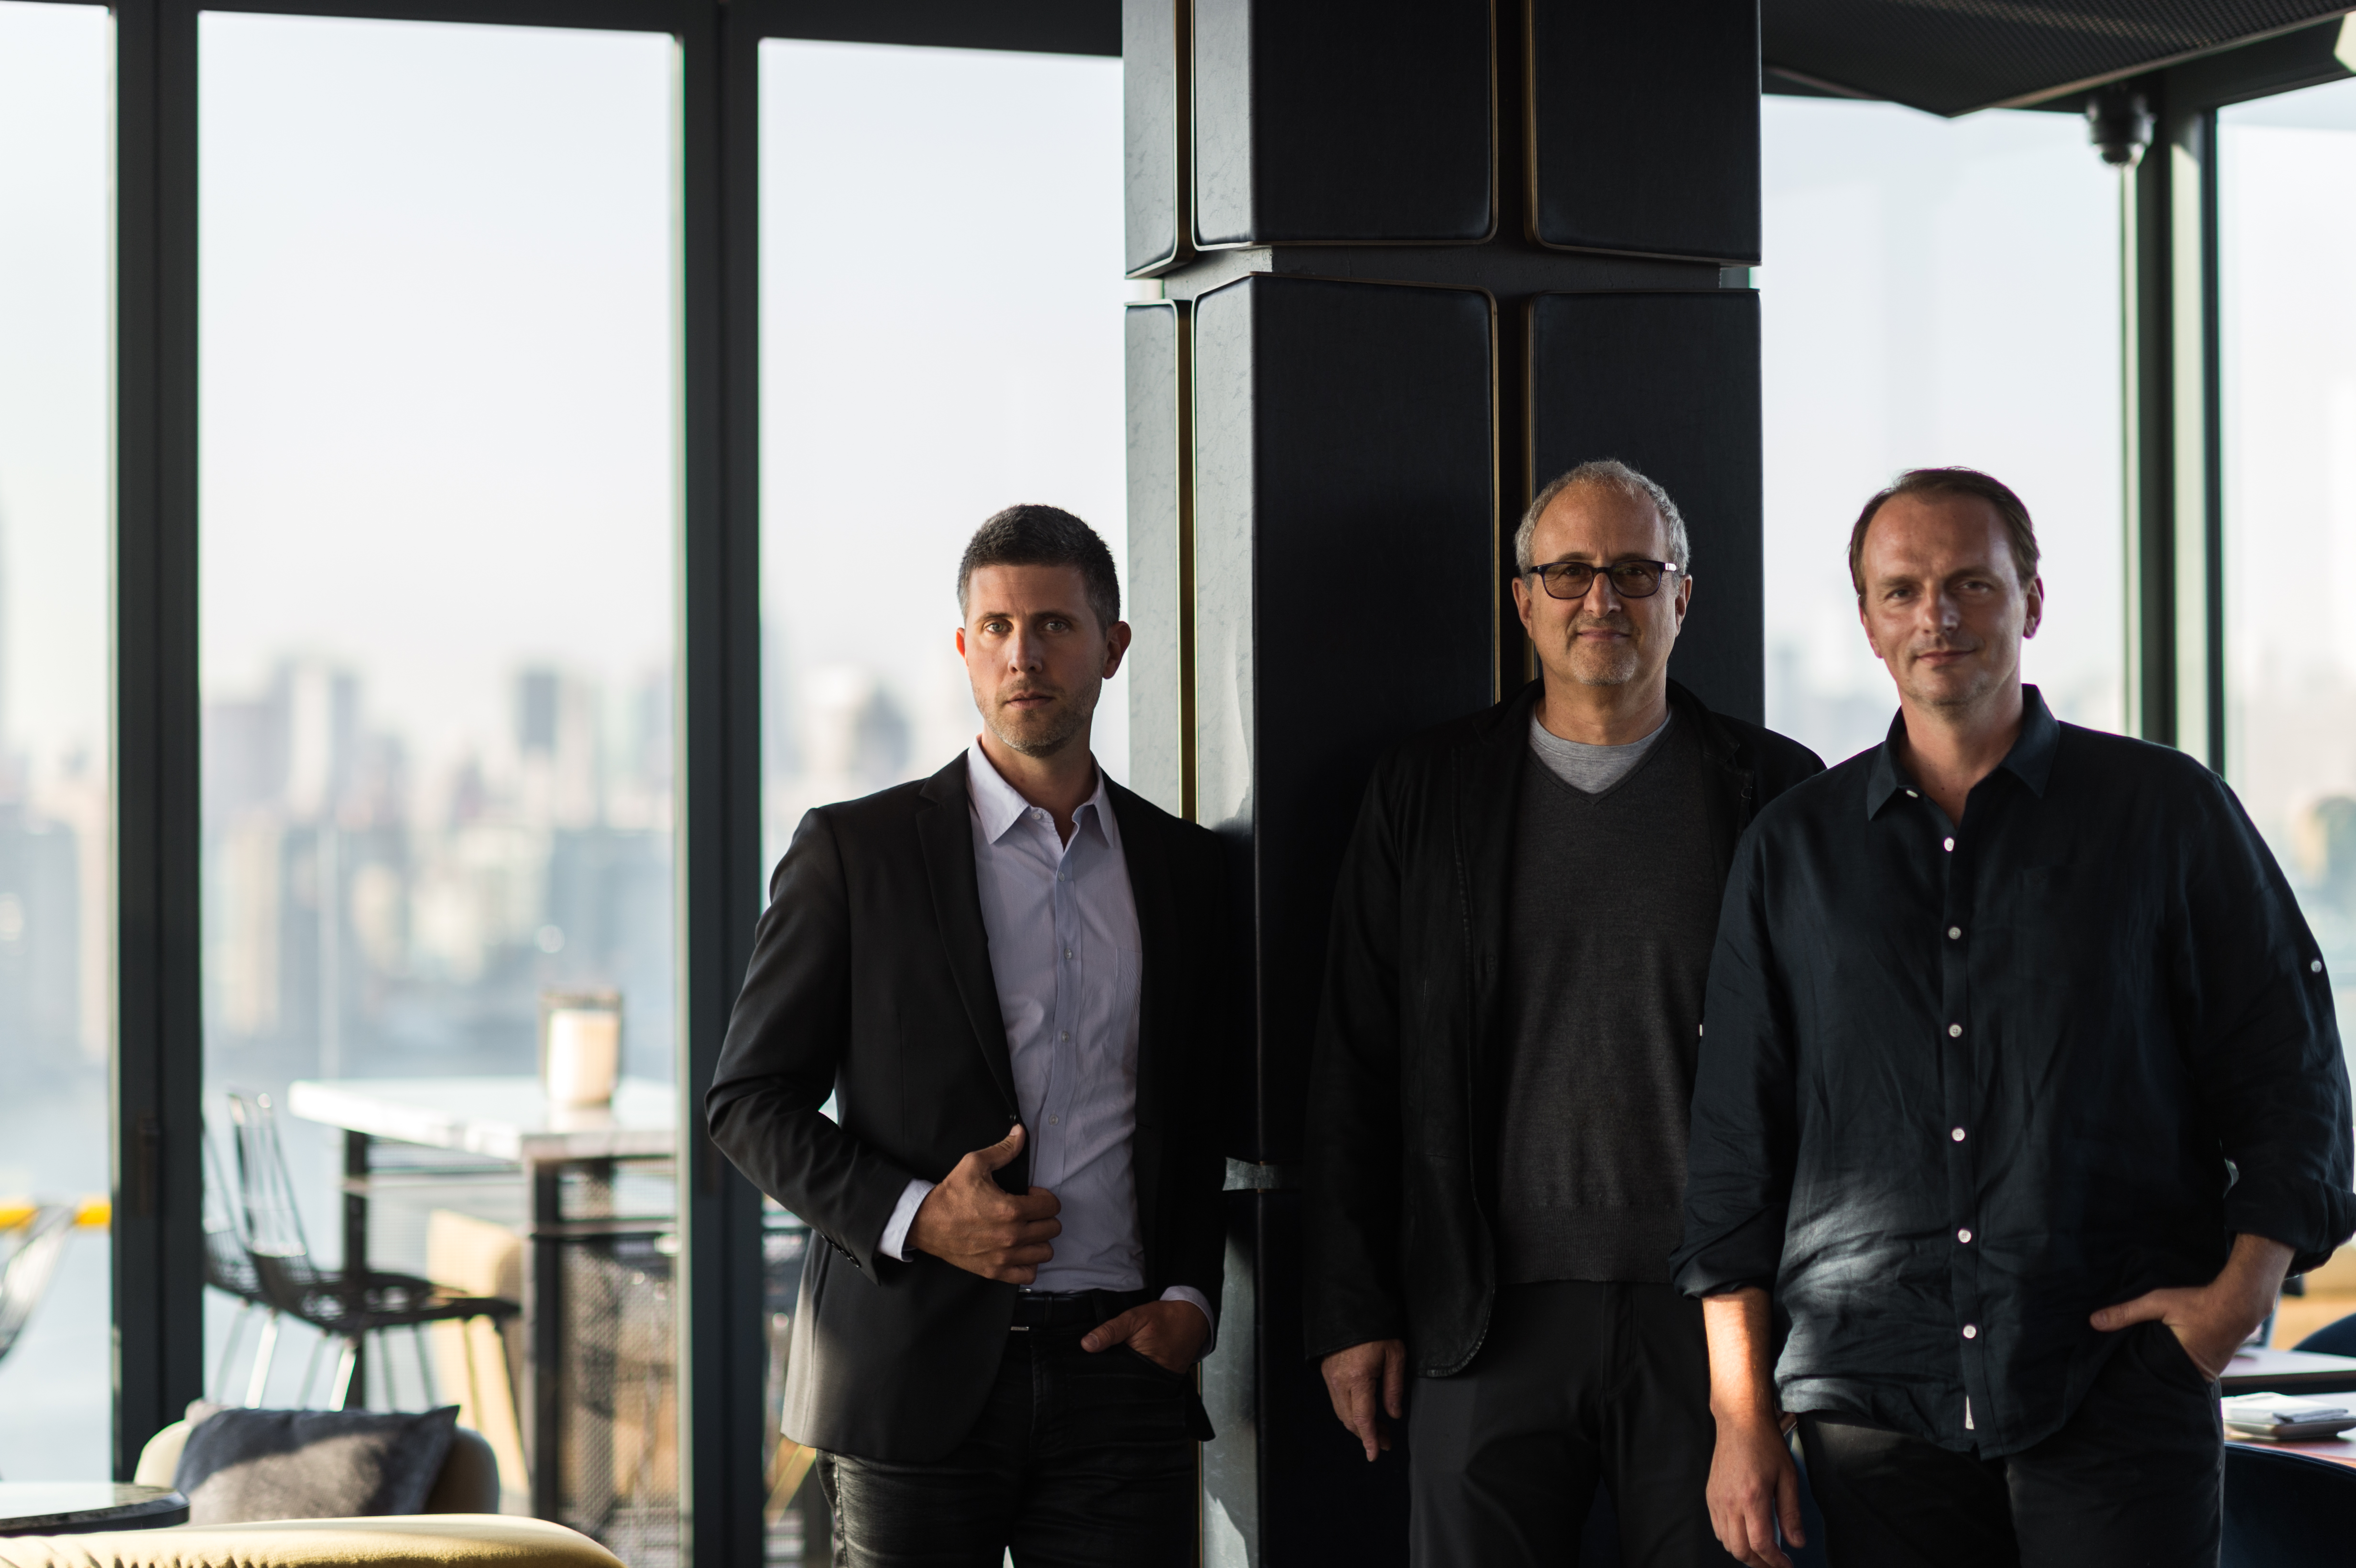 A photo of partners Luke Ostrom, Josh Pickard, and Andrew Carmellini, all dressed in dark colors and standing in front of windows with a view of Manhattan